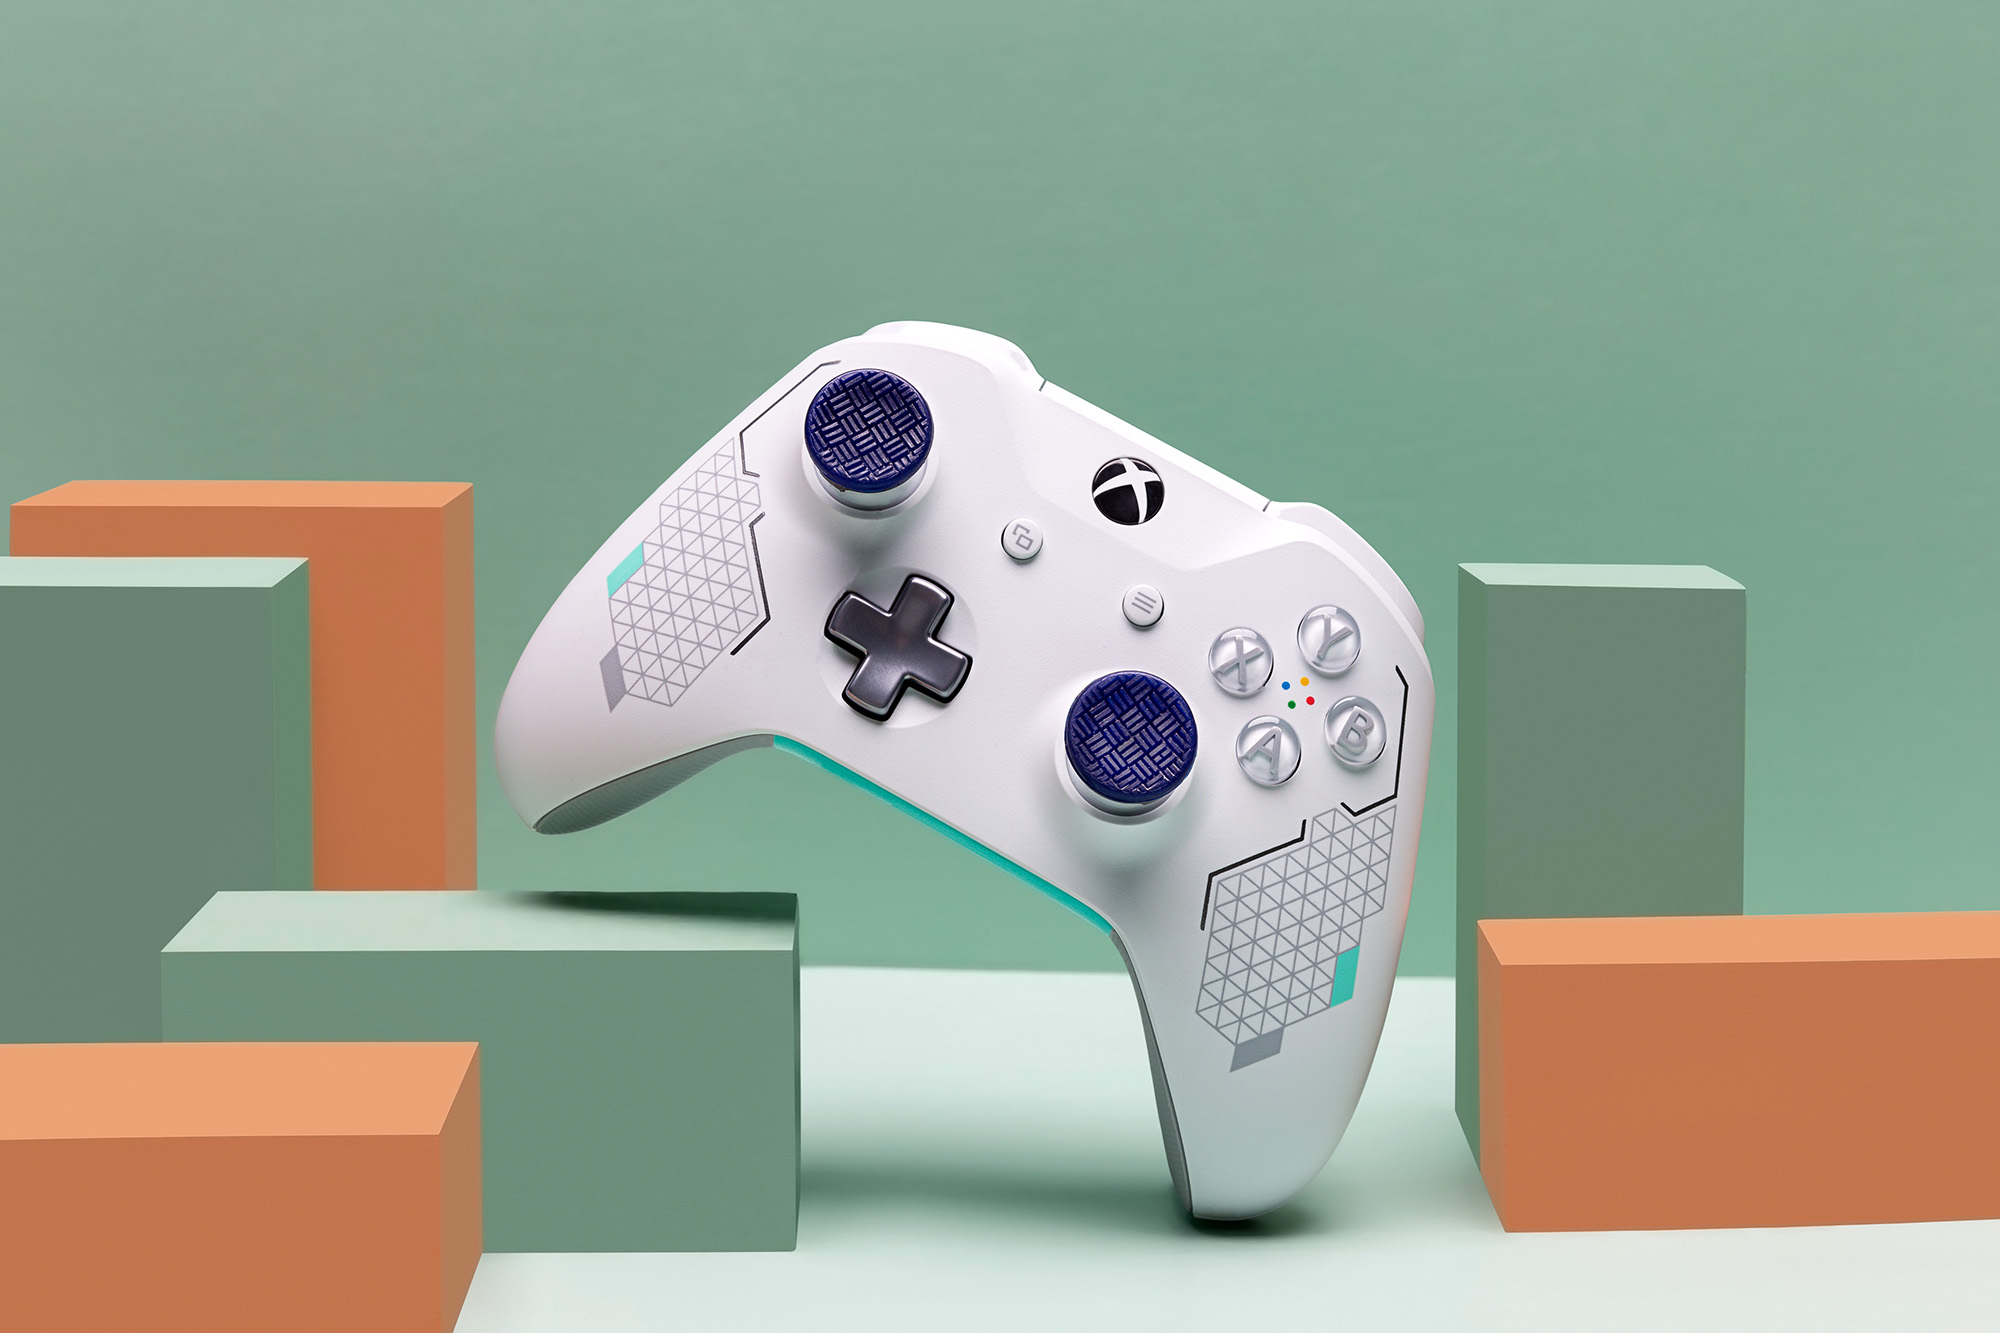 Styled scene of a white Xbox controller with purple Kontrol Freek thumbsticks.